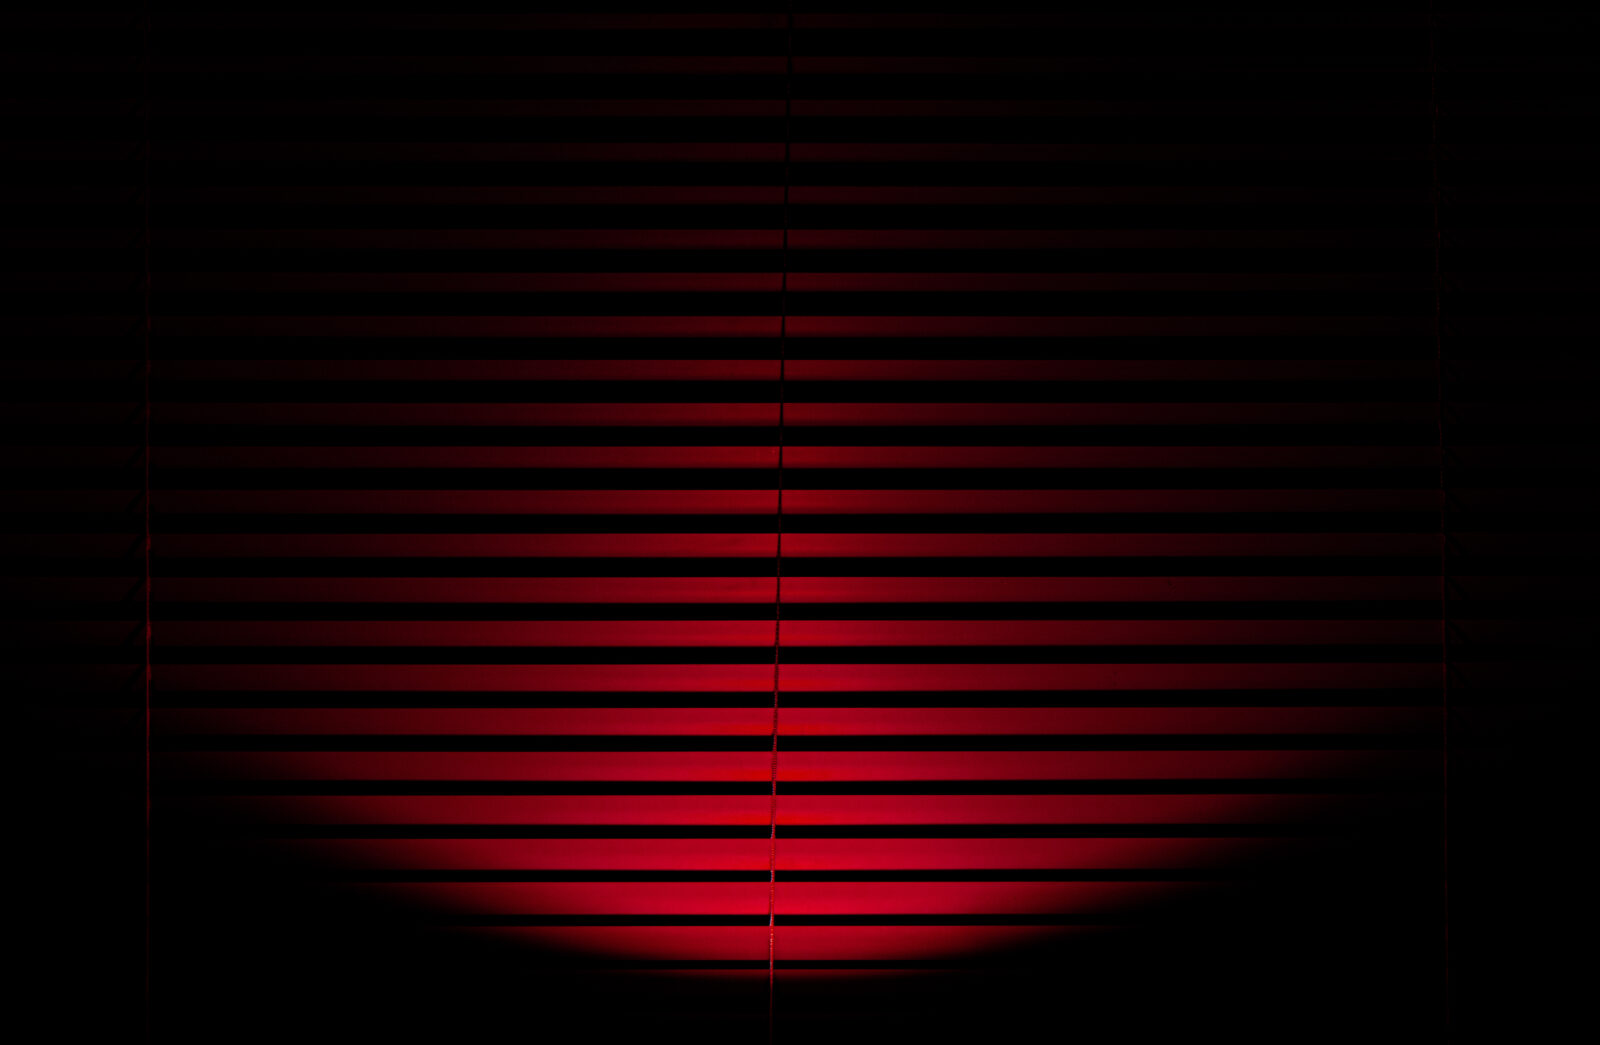 Red light shining onto closed red blinds creating a pattern of red and black lines in a semicircle